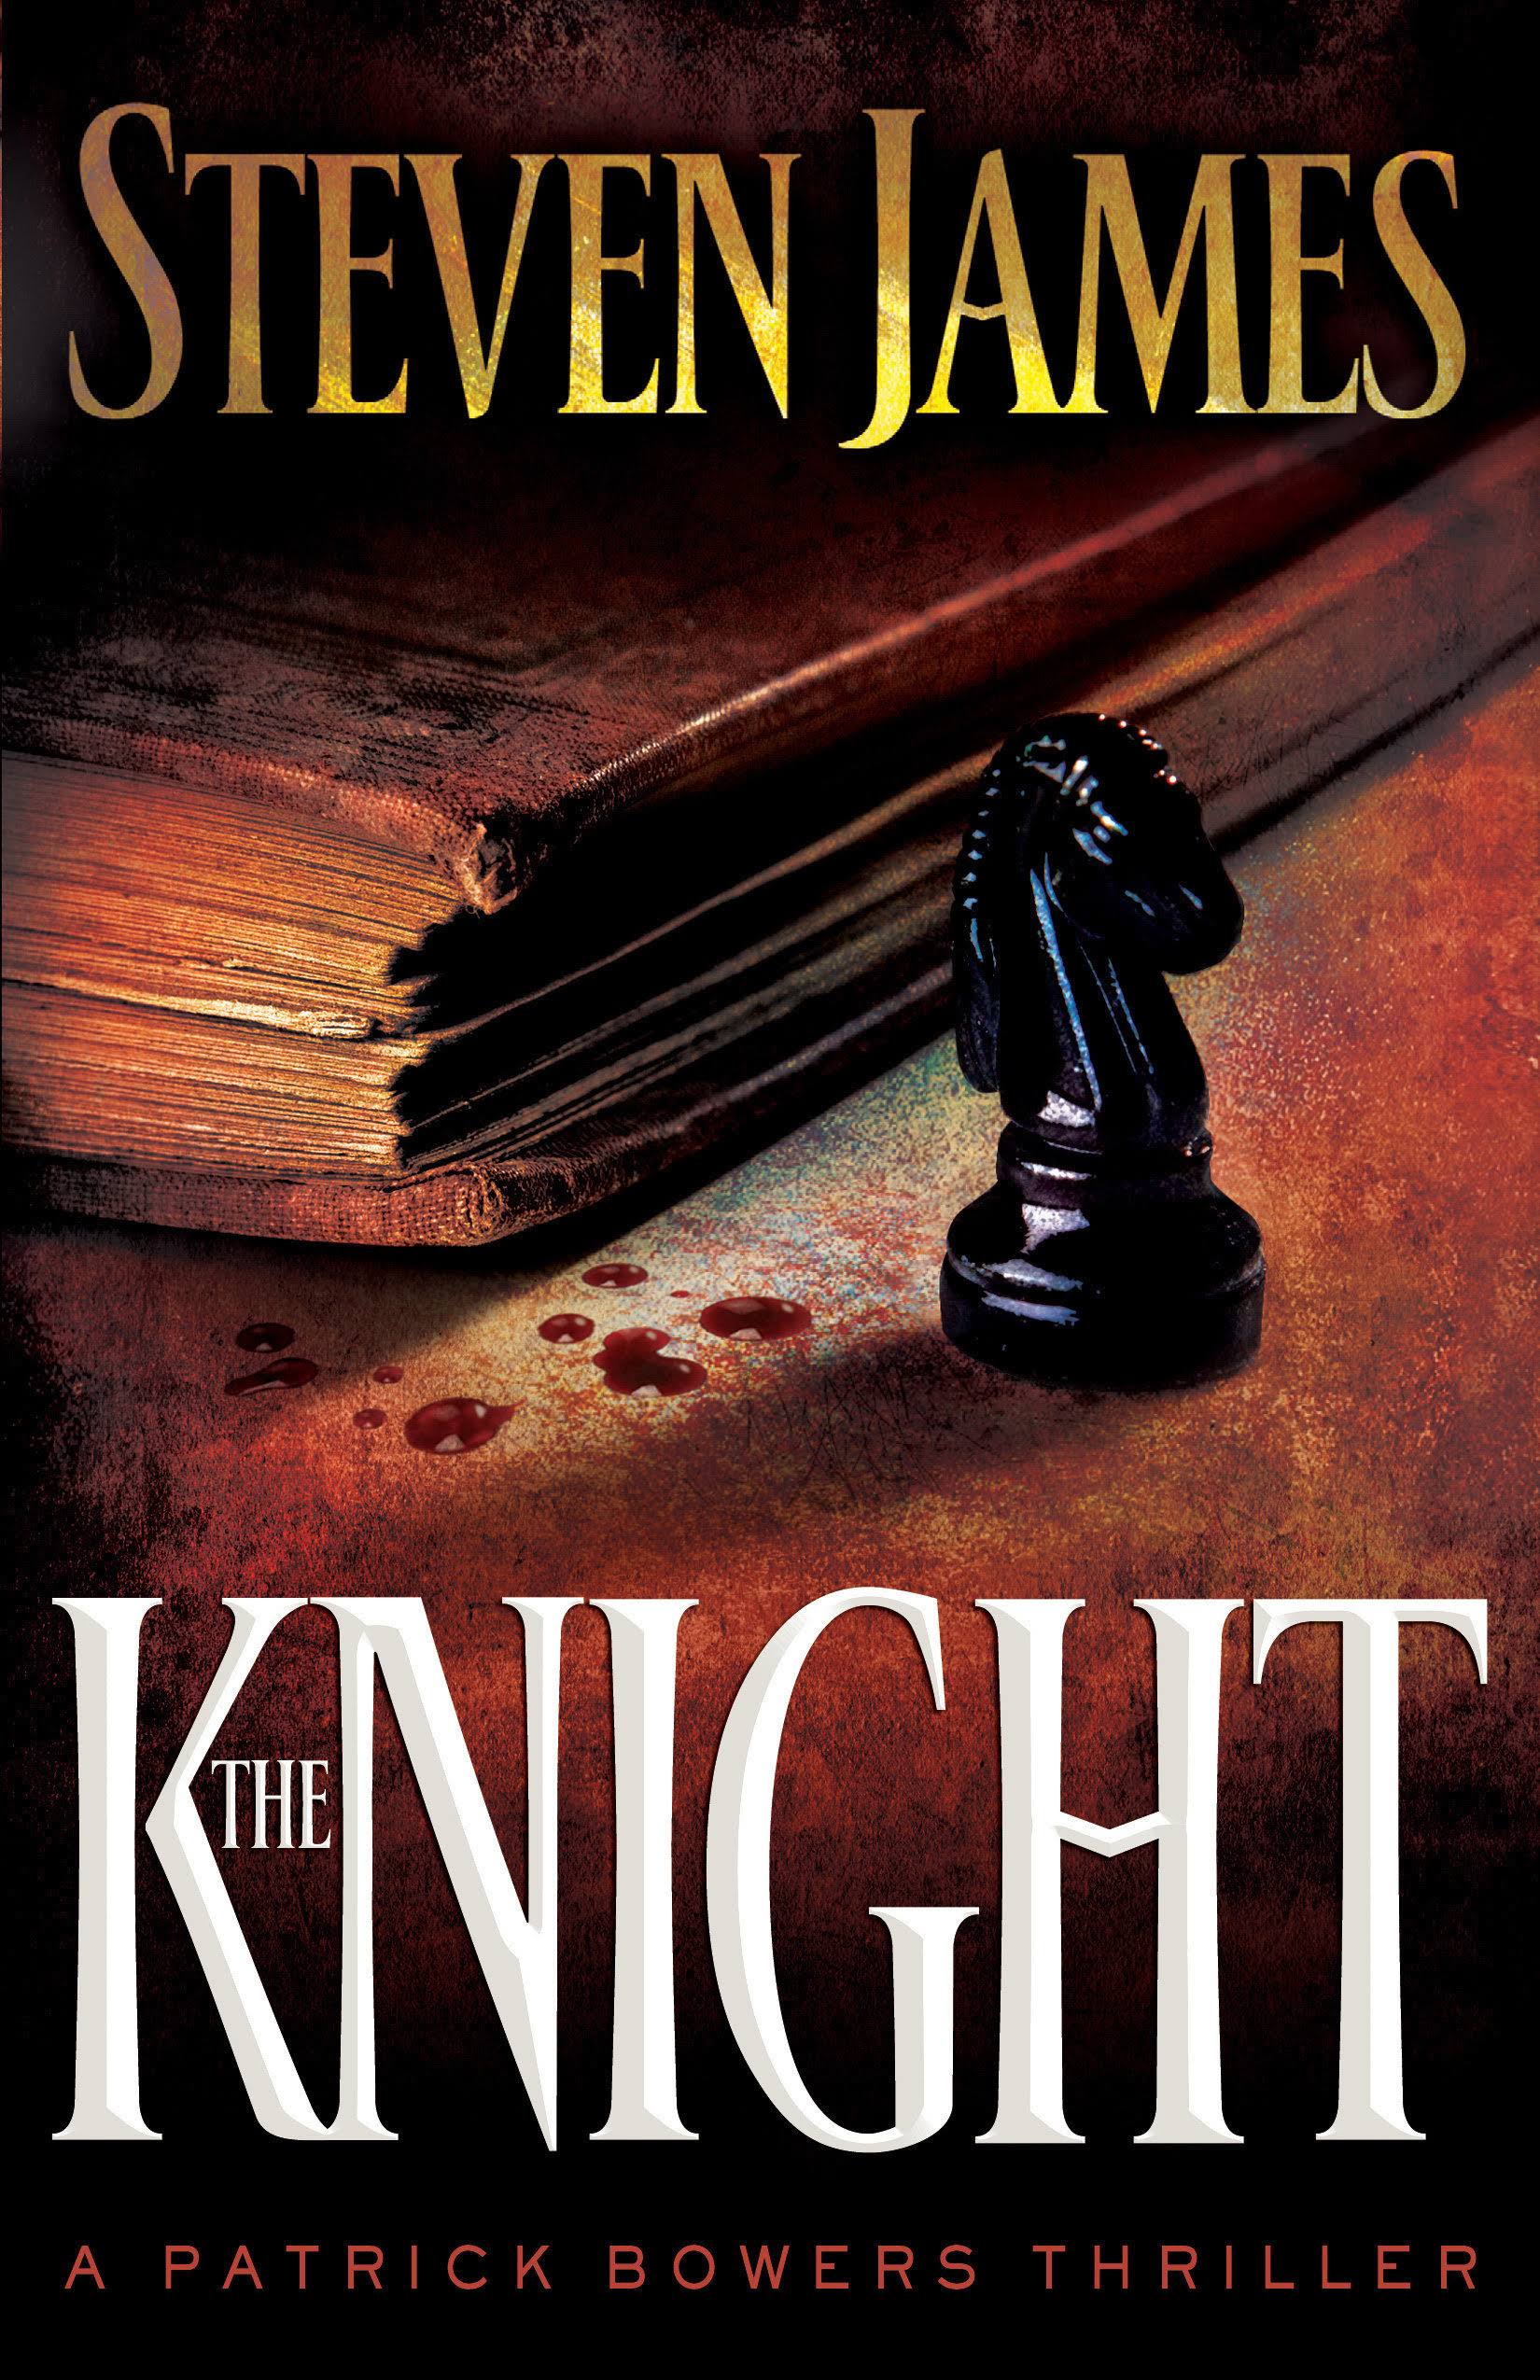 The Knight [Book]